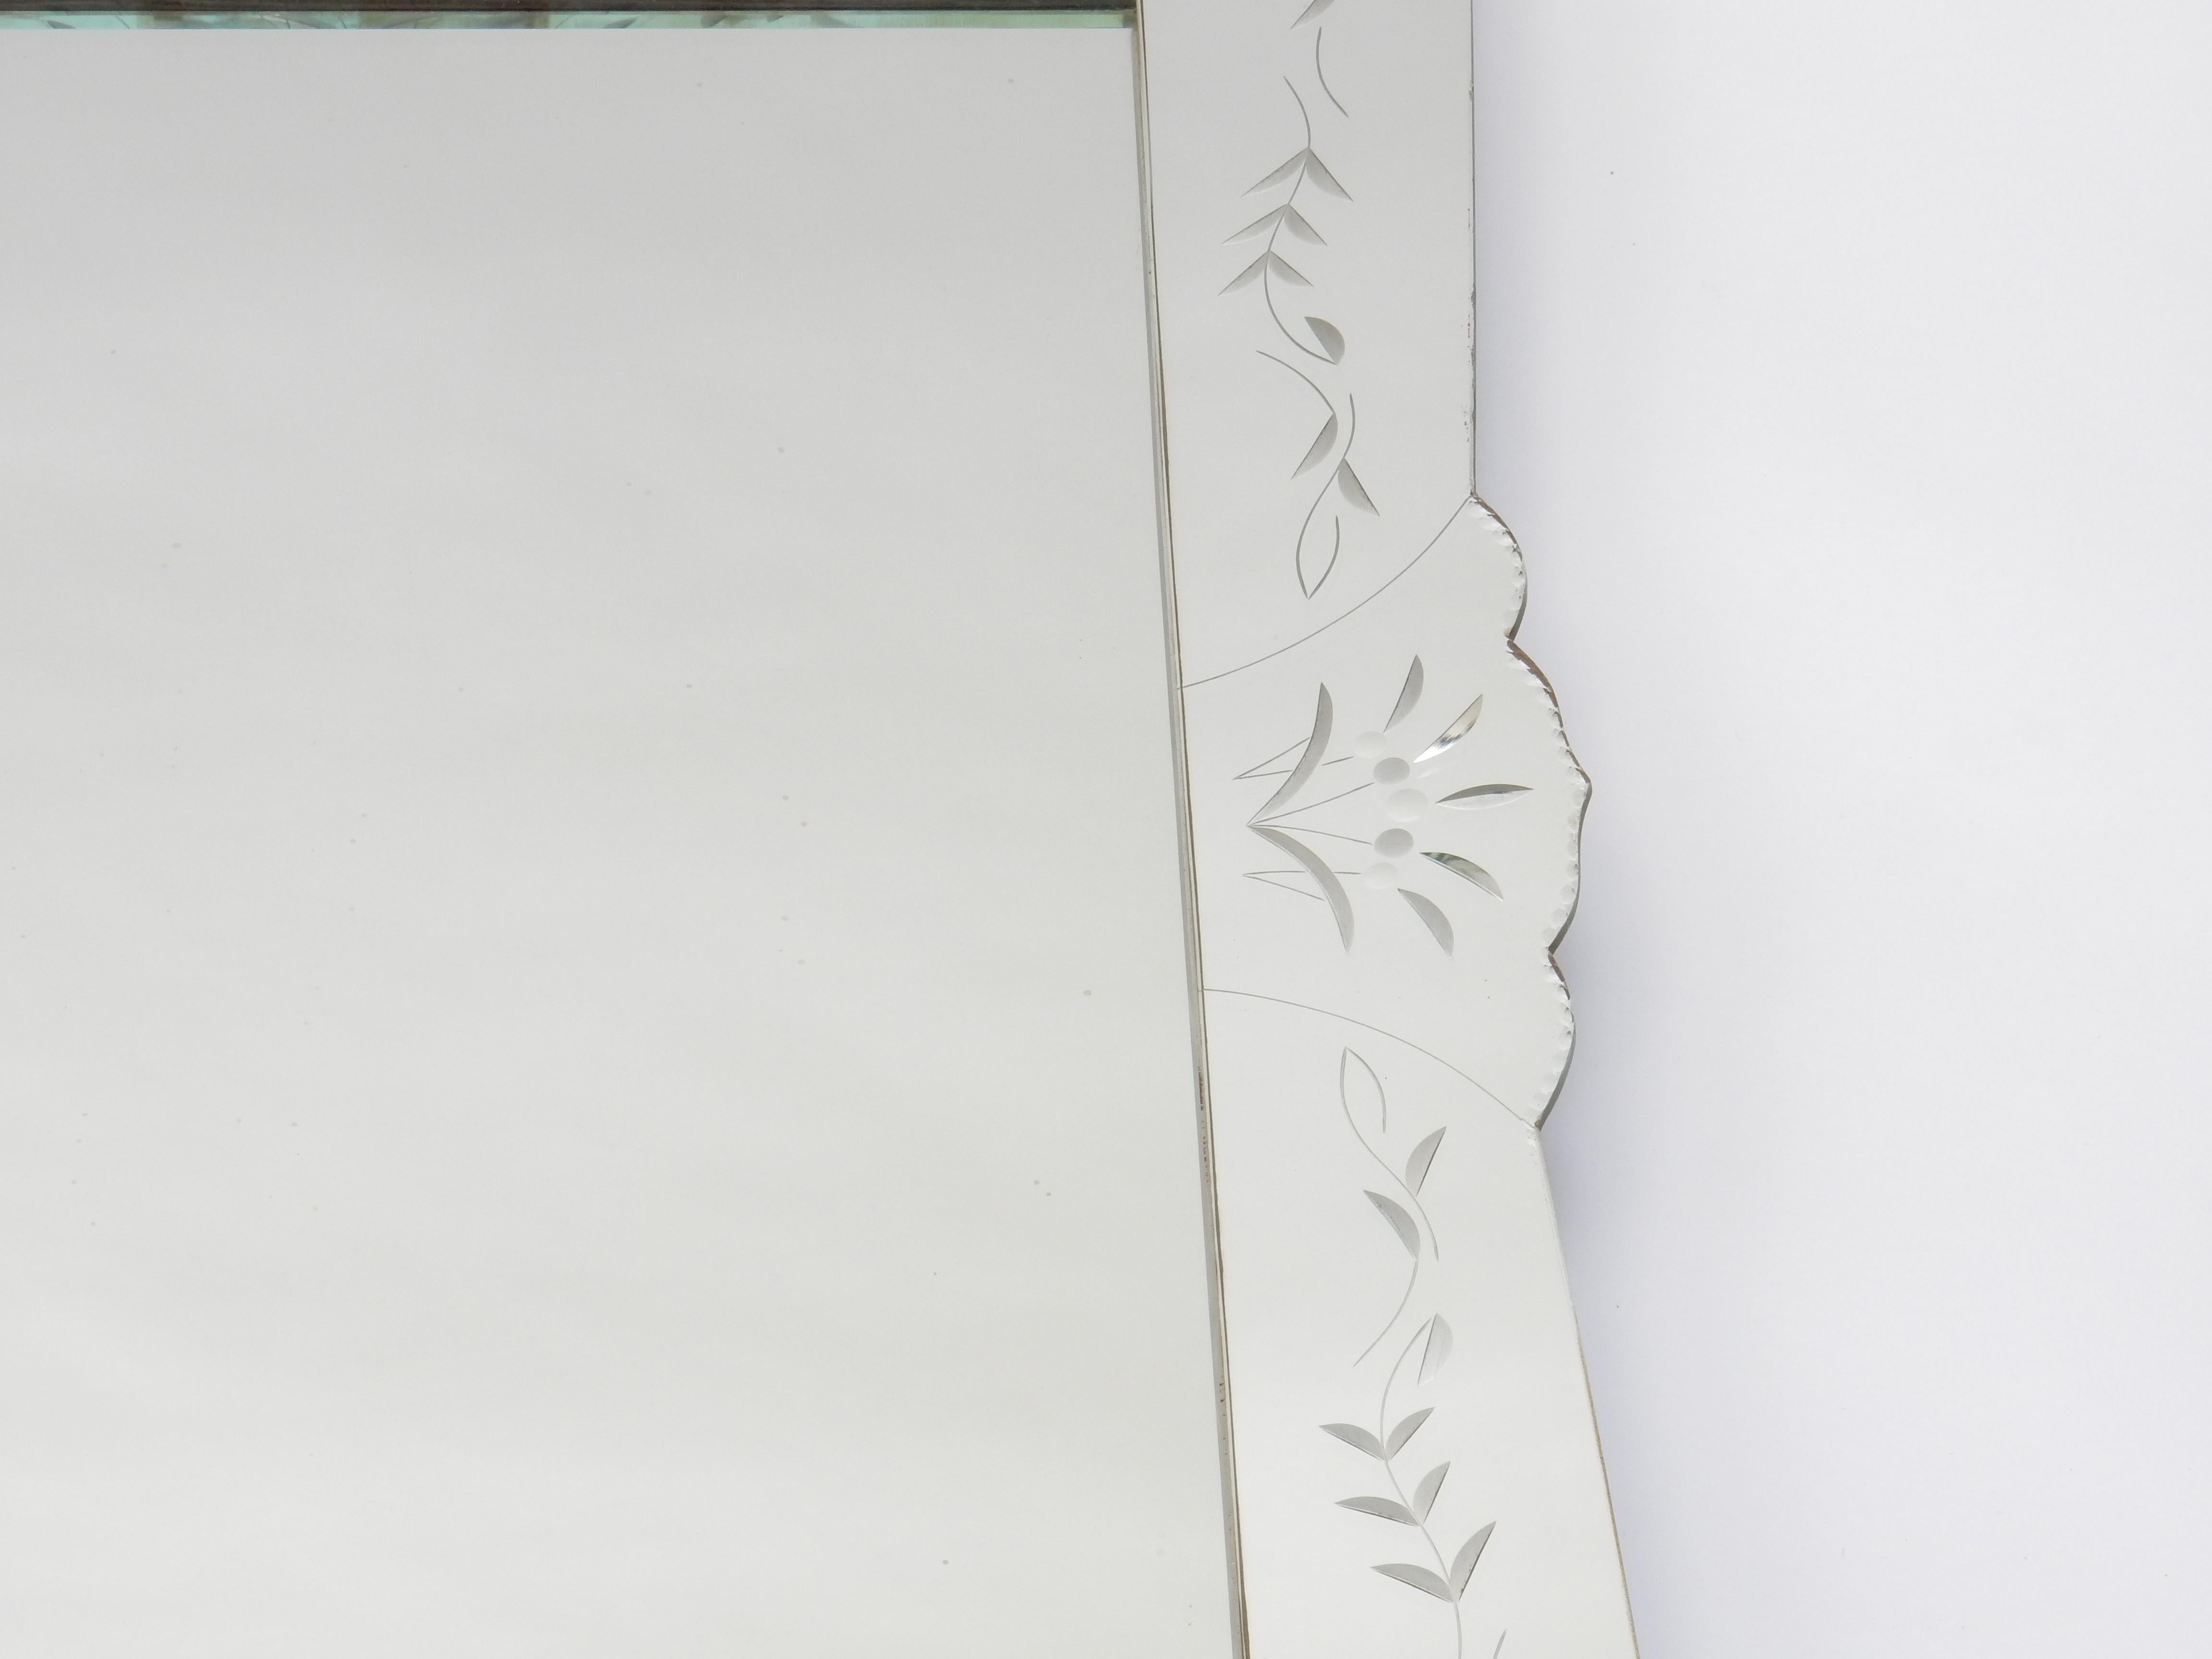 Venetian style mirror with reverse etched design. Serpentine border. Wooden back. Fine quality. May be hung vertically or horizontally. Mirror is currently prepared to hang vertically.